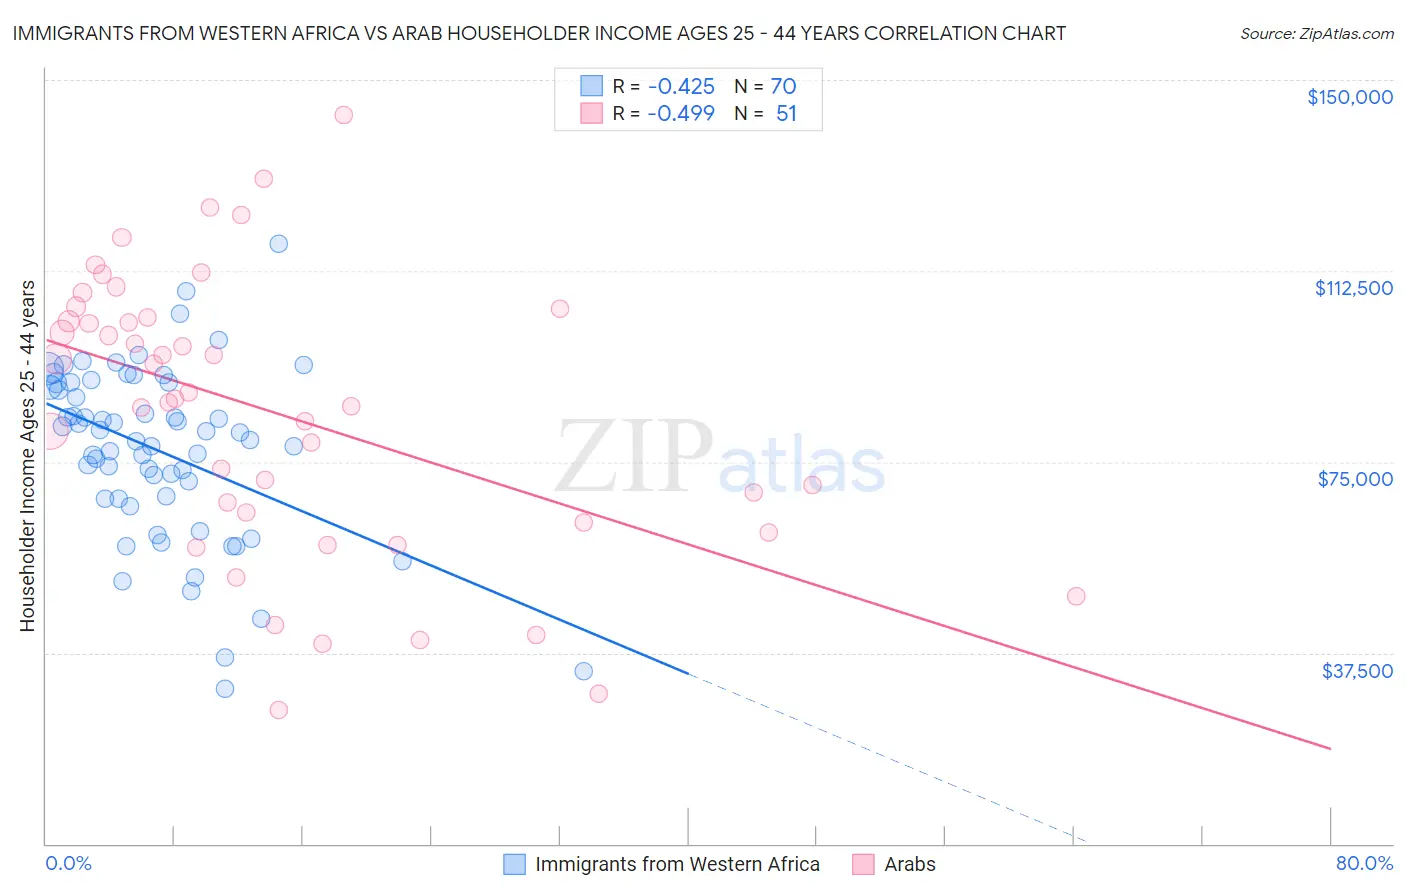 Immigrants from Western Africa vs Arab Householder Income Ages 25 - 44 years